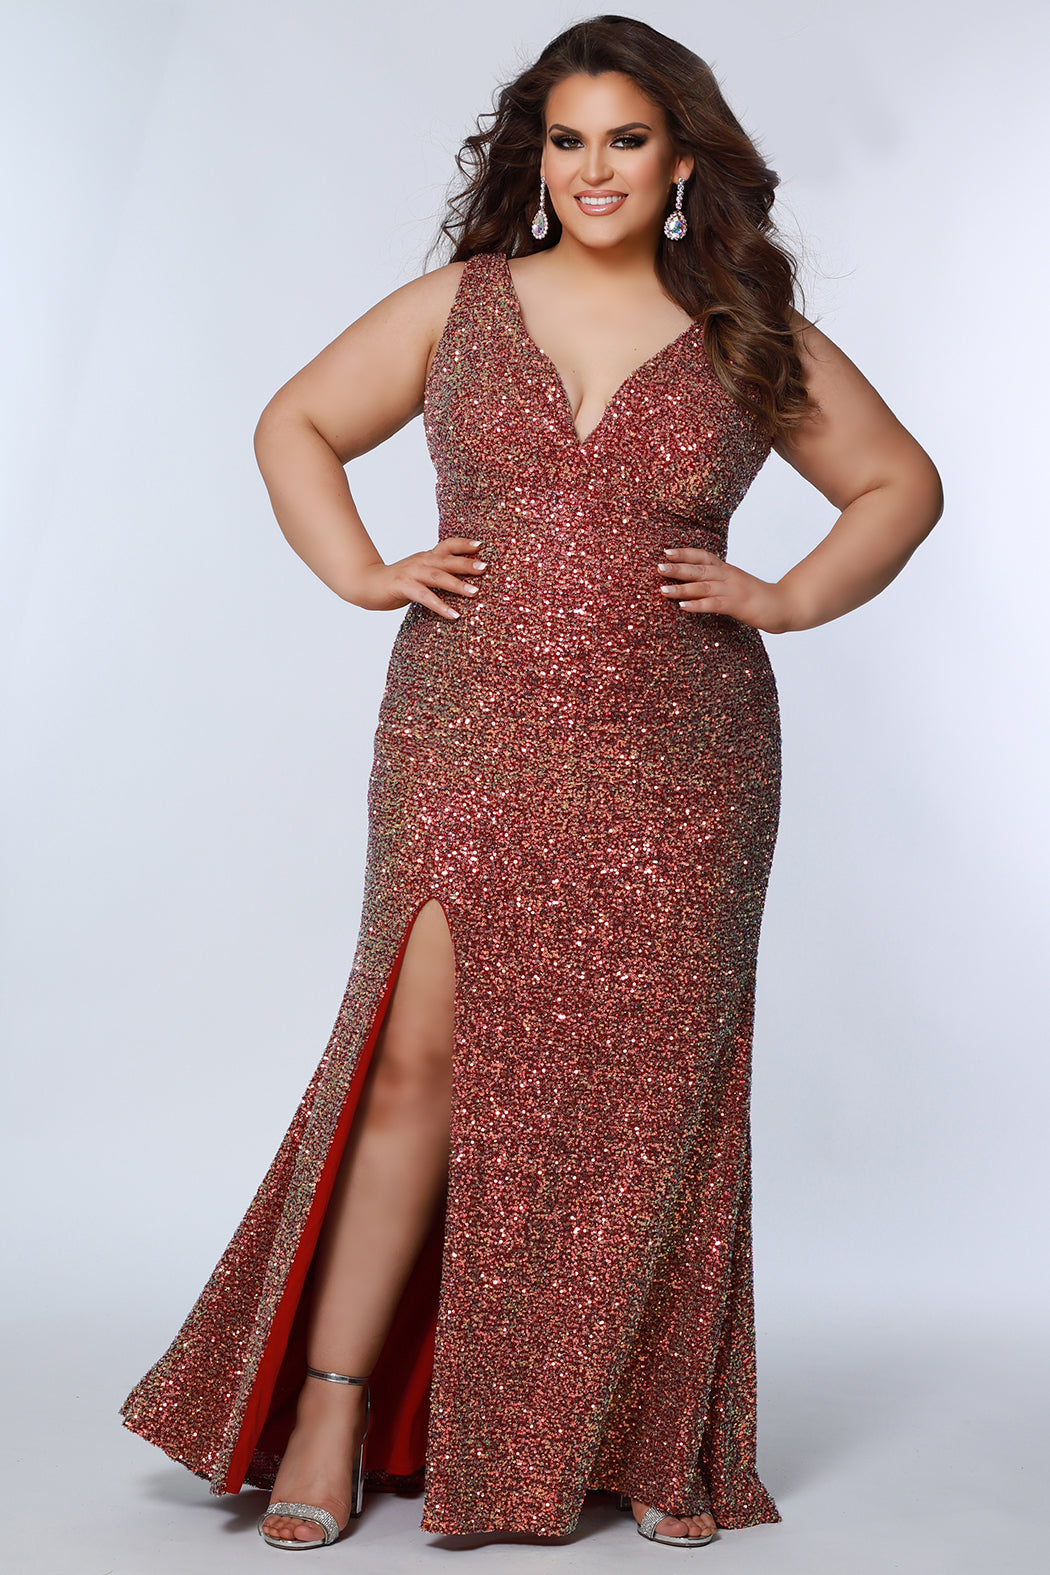 Treat yourself to a little elegant vibes in Sydney's Closet SC7339 Sleeveless Plus-Sized Prom Dress! With a V-Neckline and long-gown silhouette, you’re sure to be a showstopper. And, with a slit added to the mix, you're sure to be doin' the most on the dance floor. Puttin' on the glitz has never been so easy!